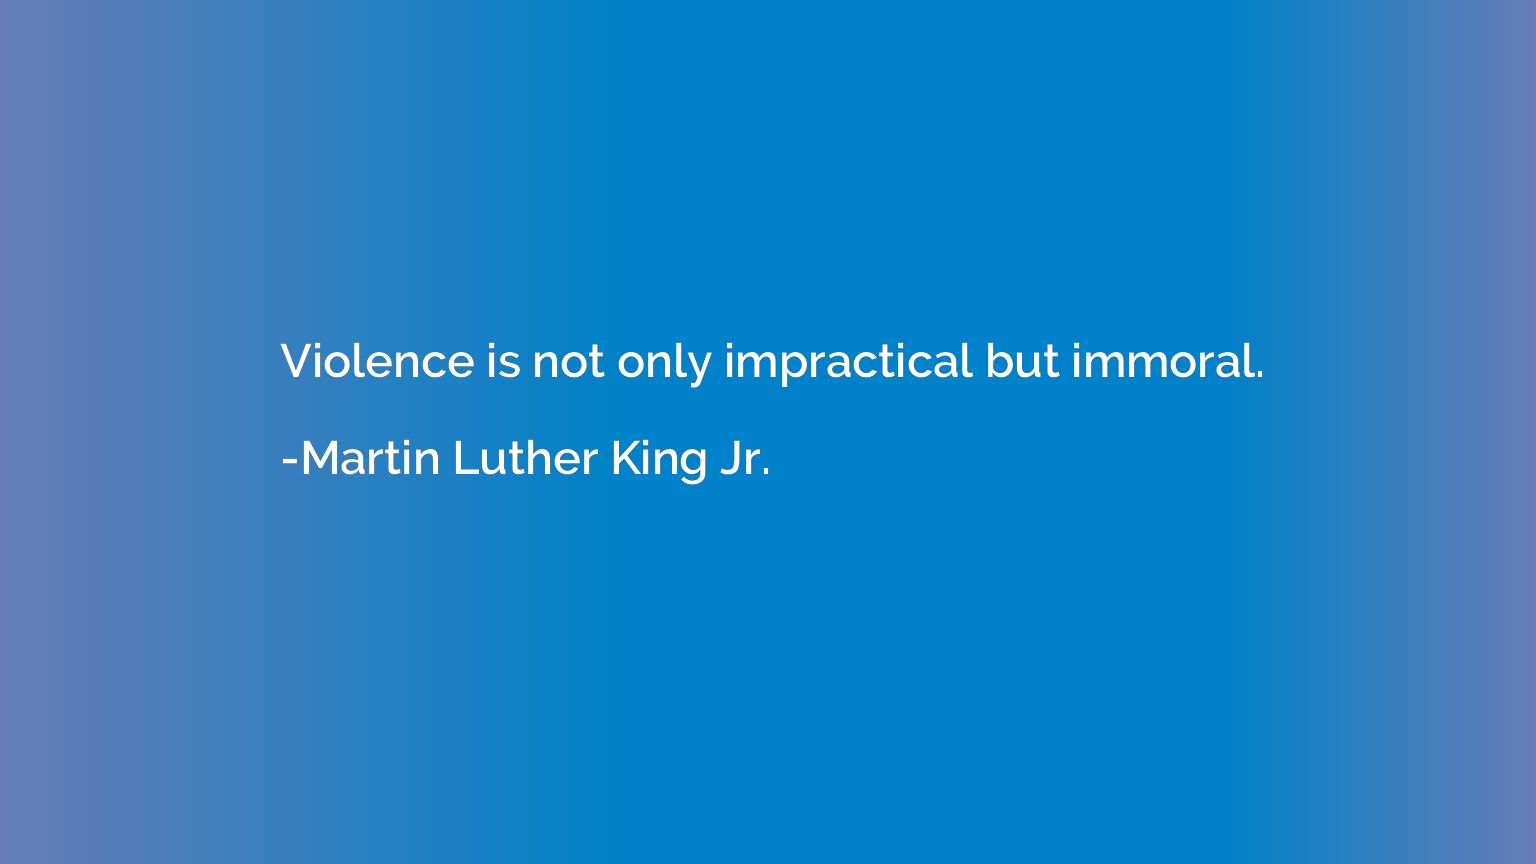 Violence is not only impractical but immoral.